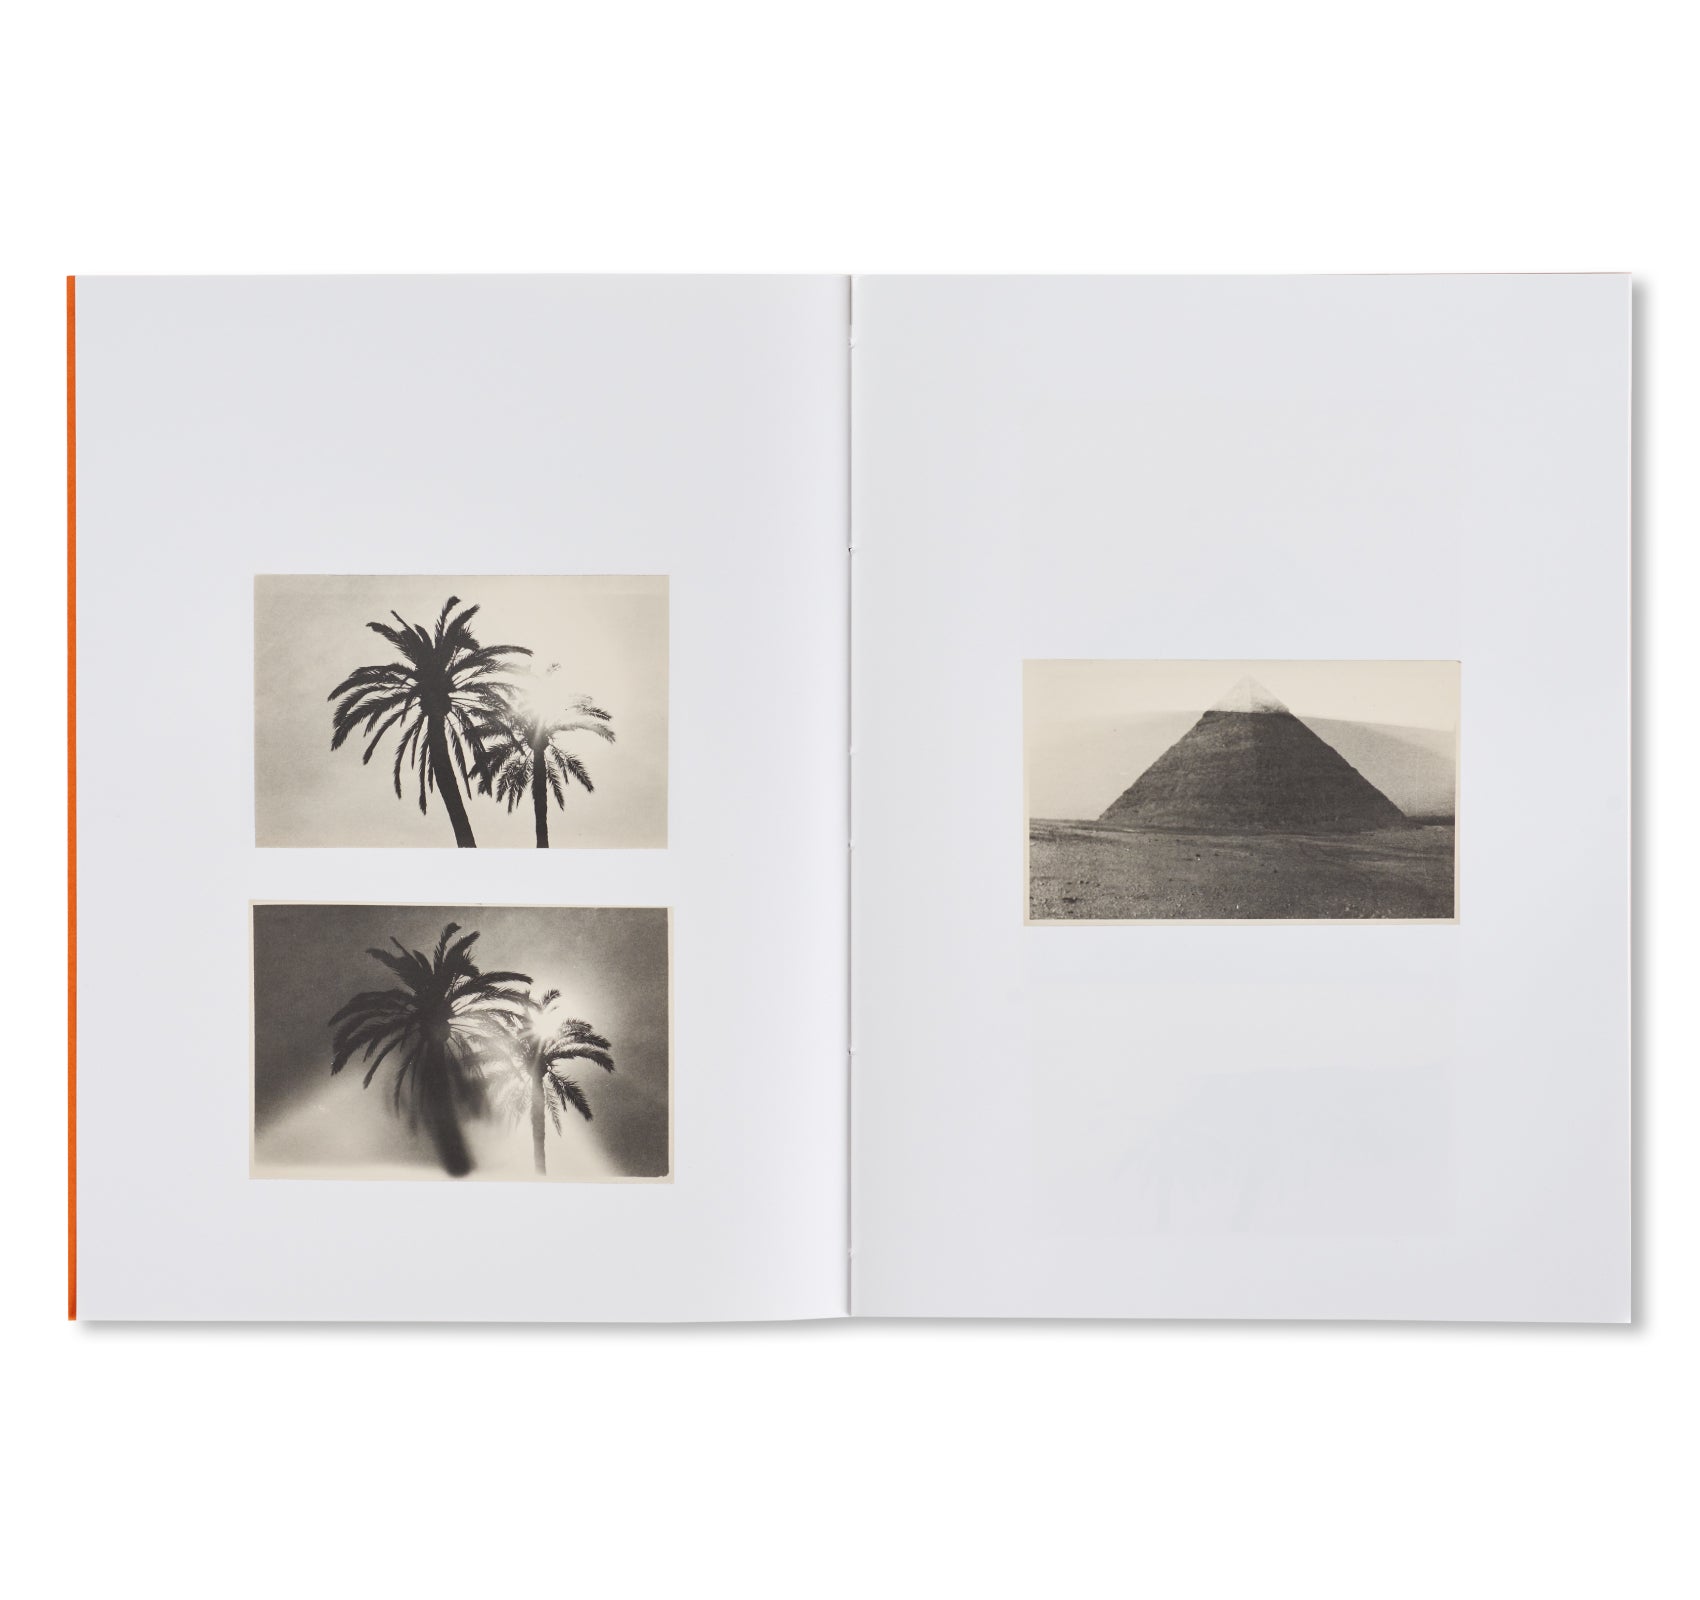 THE PYRAMIDS AND PALM TREES TEST by Bruno V. Roels